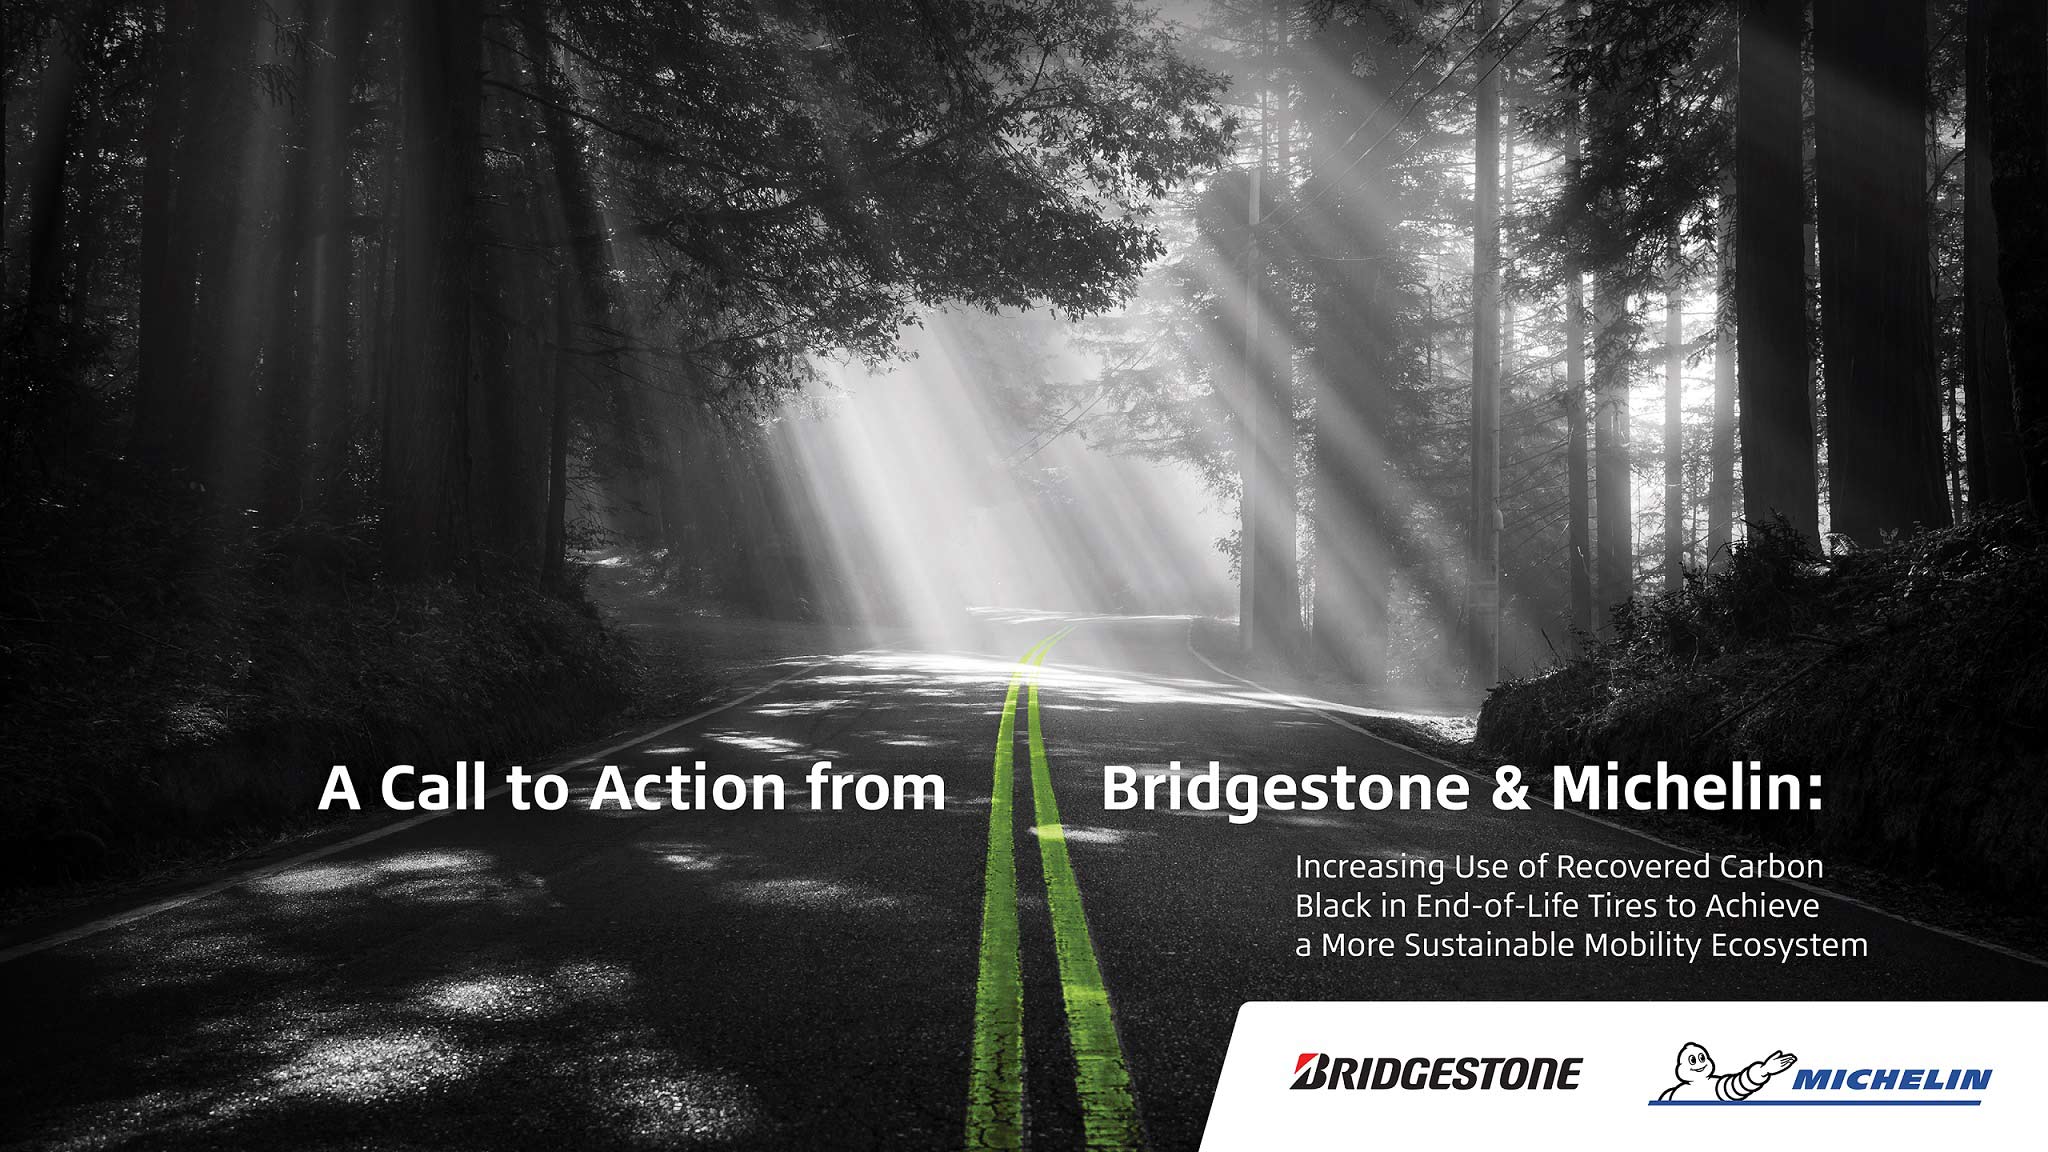 Bridgestone and Michelin to Jointly Discuss Recovered Carbon Black’s Role in Building a More Sustainable Mobility Ecosystem